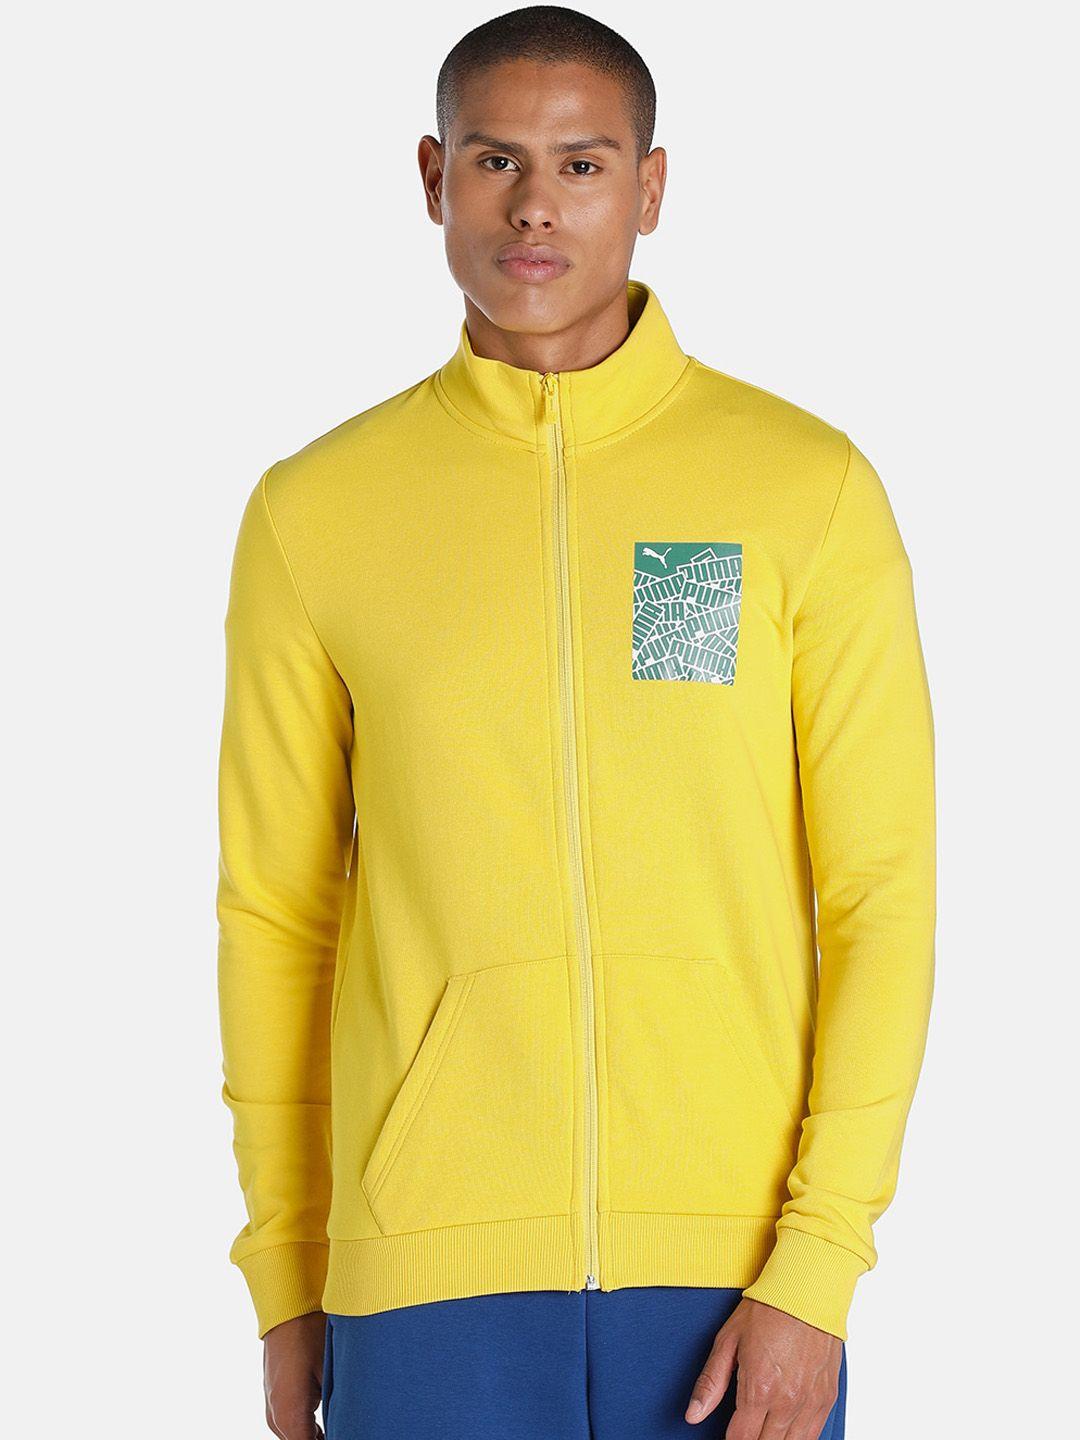 puma-men-yellow-graphic-logo-outdoor-sporty-jacket-with-patchwork